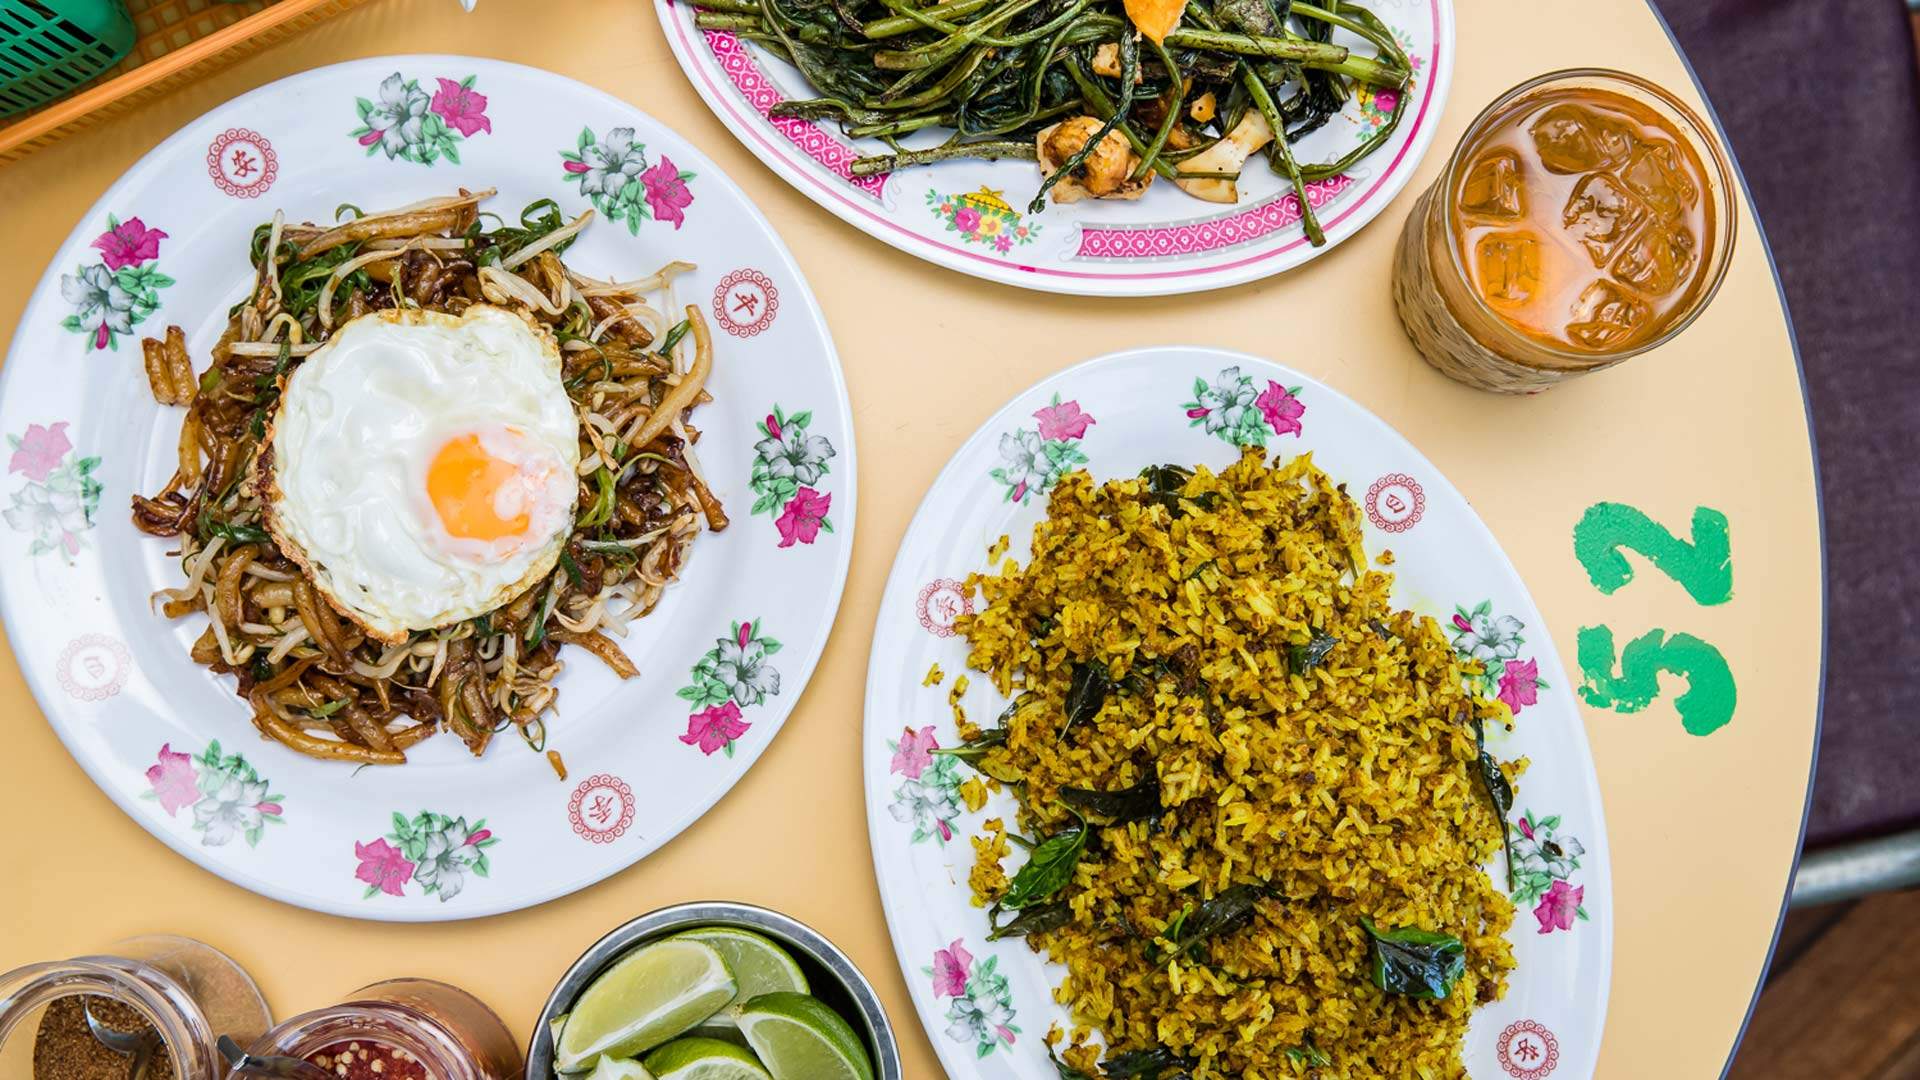 ACME and Merivale's Cambodian Street Food Pop-Up Is Opening This Week